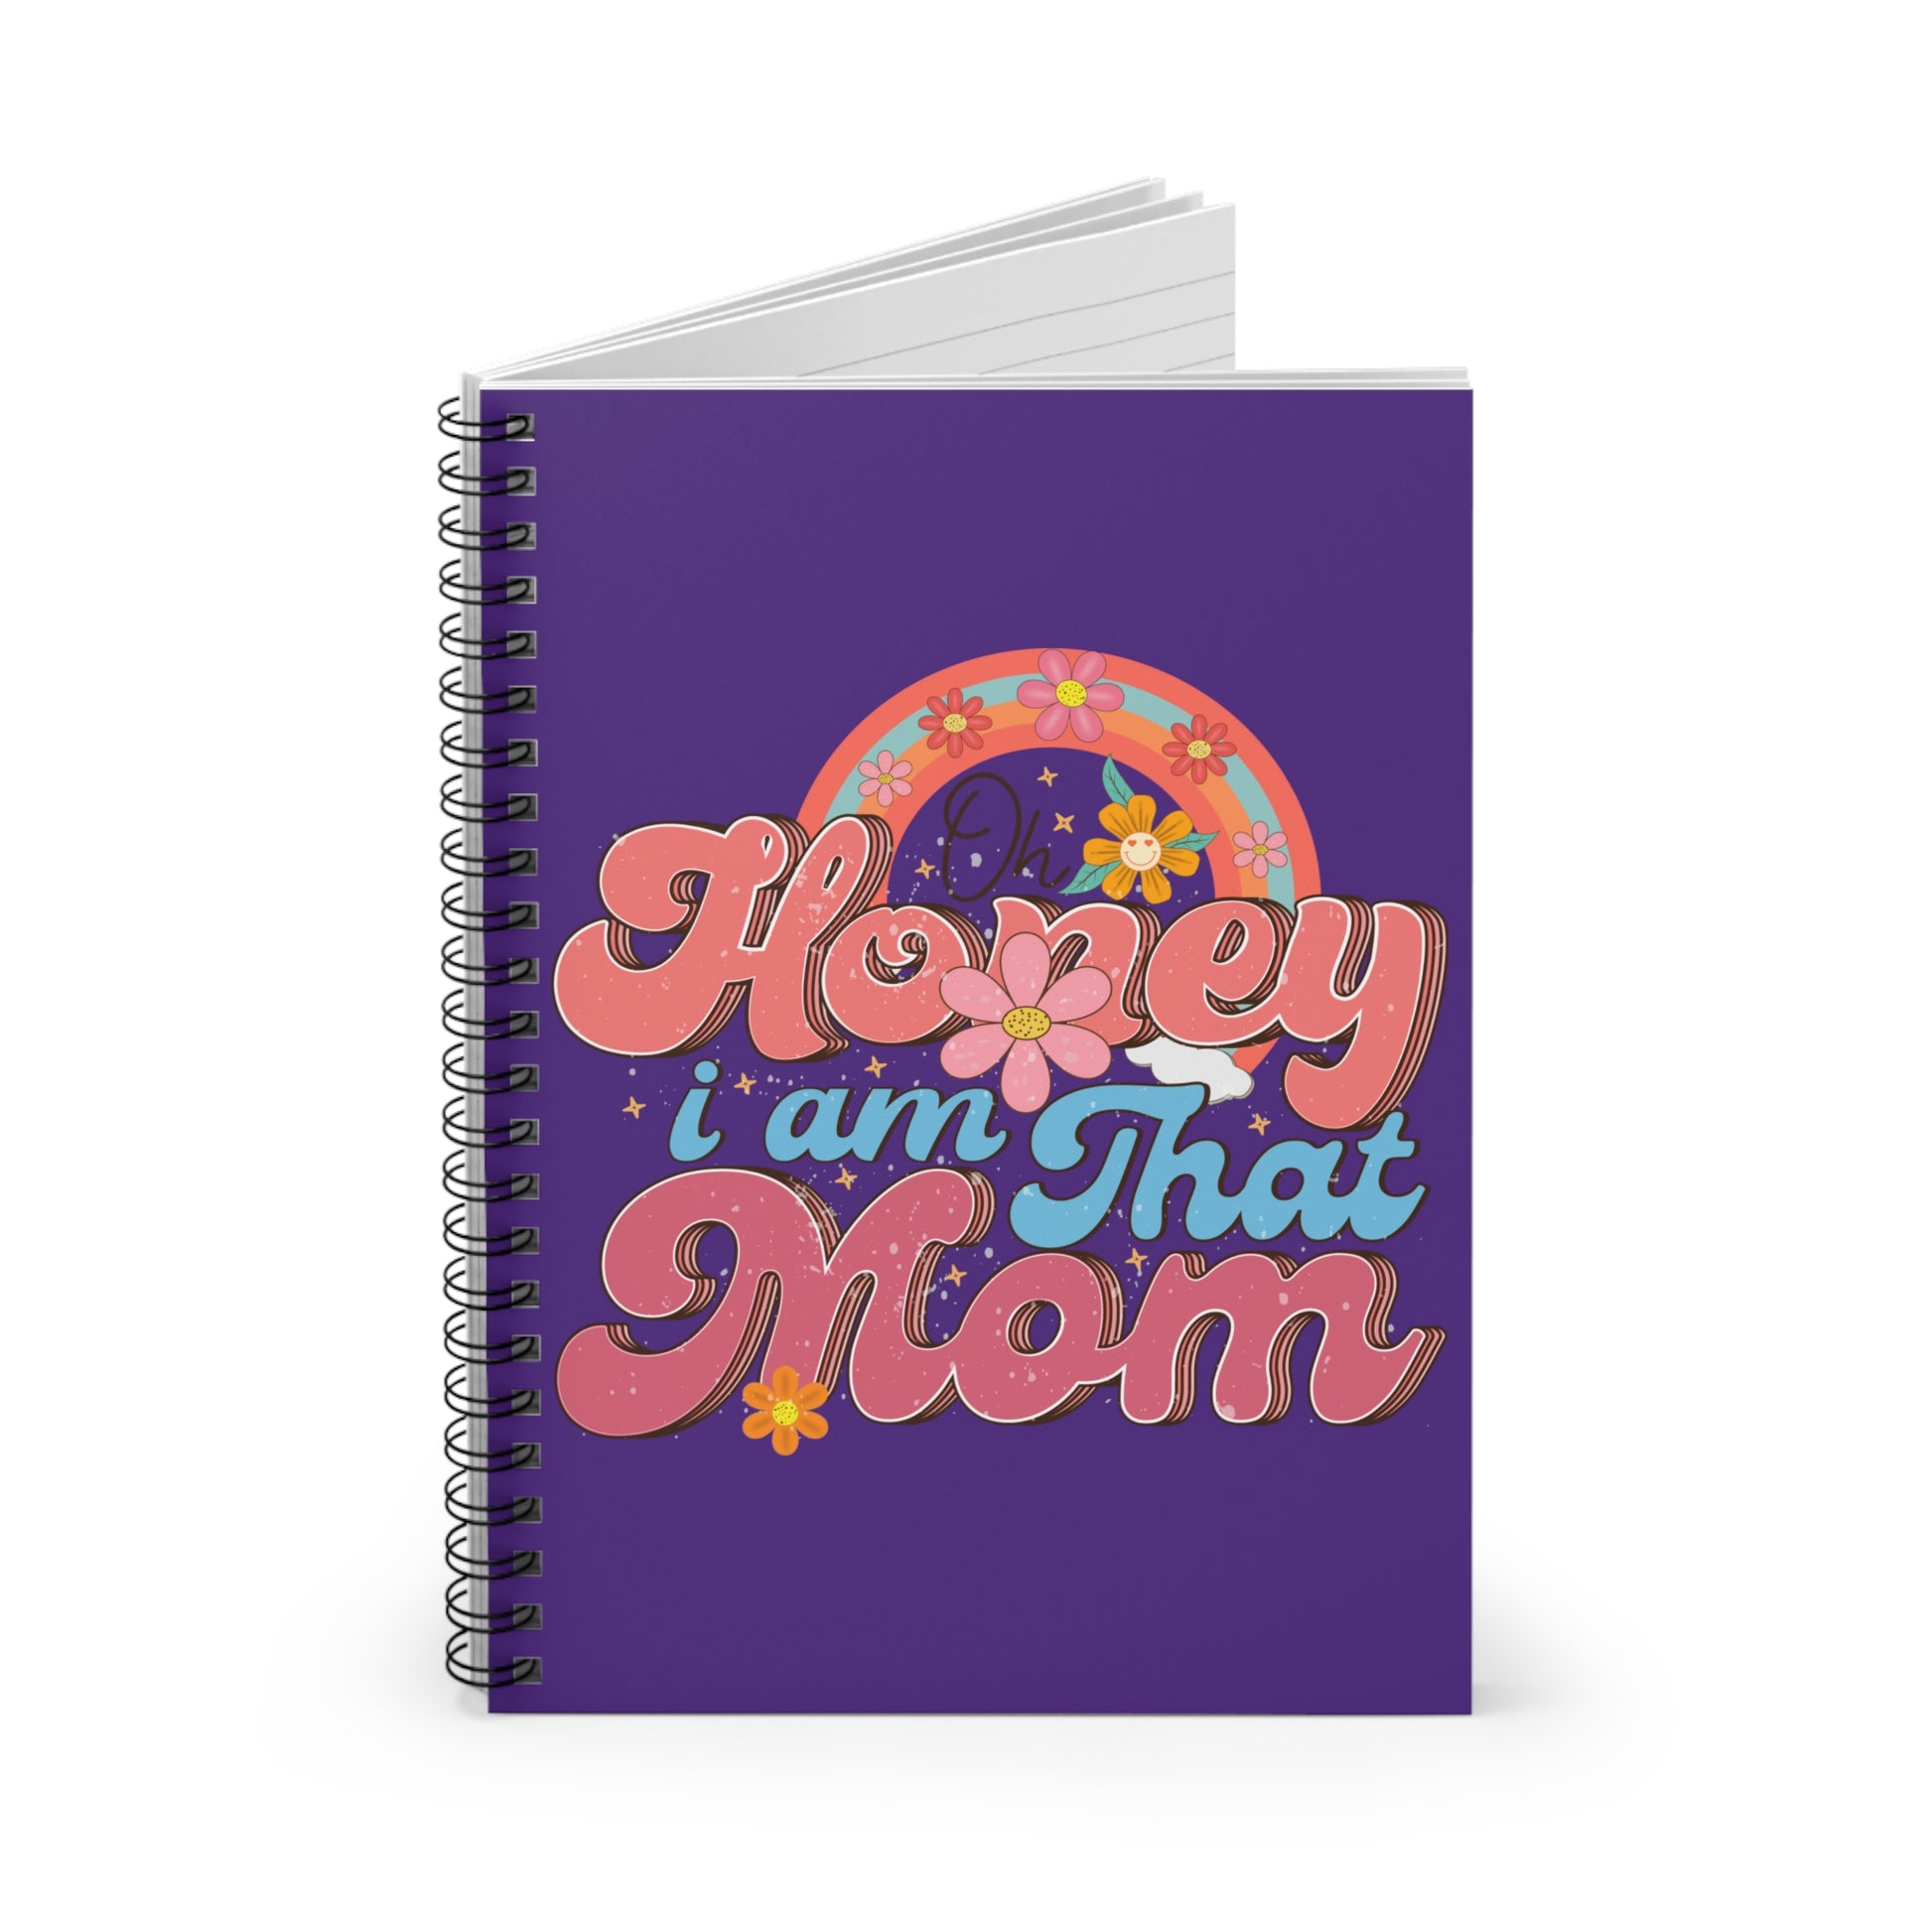 I am That Mom: Spiral Notebook - Log Books - Journals - Diaries - and More Custom Printed by TheGlassyLass